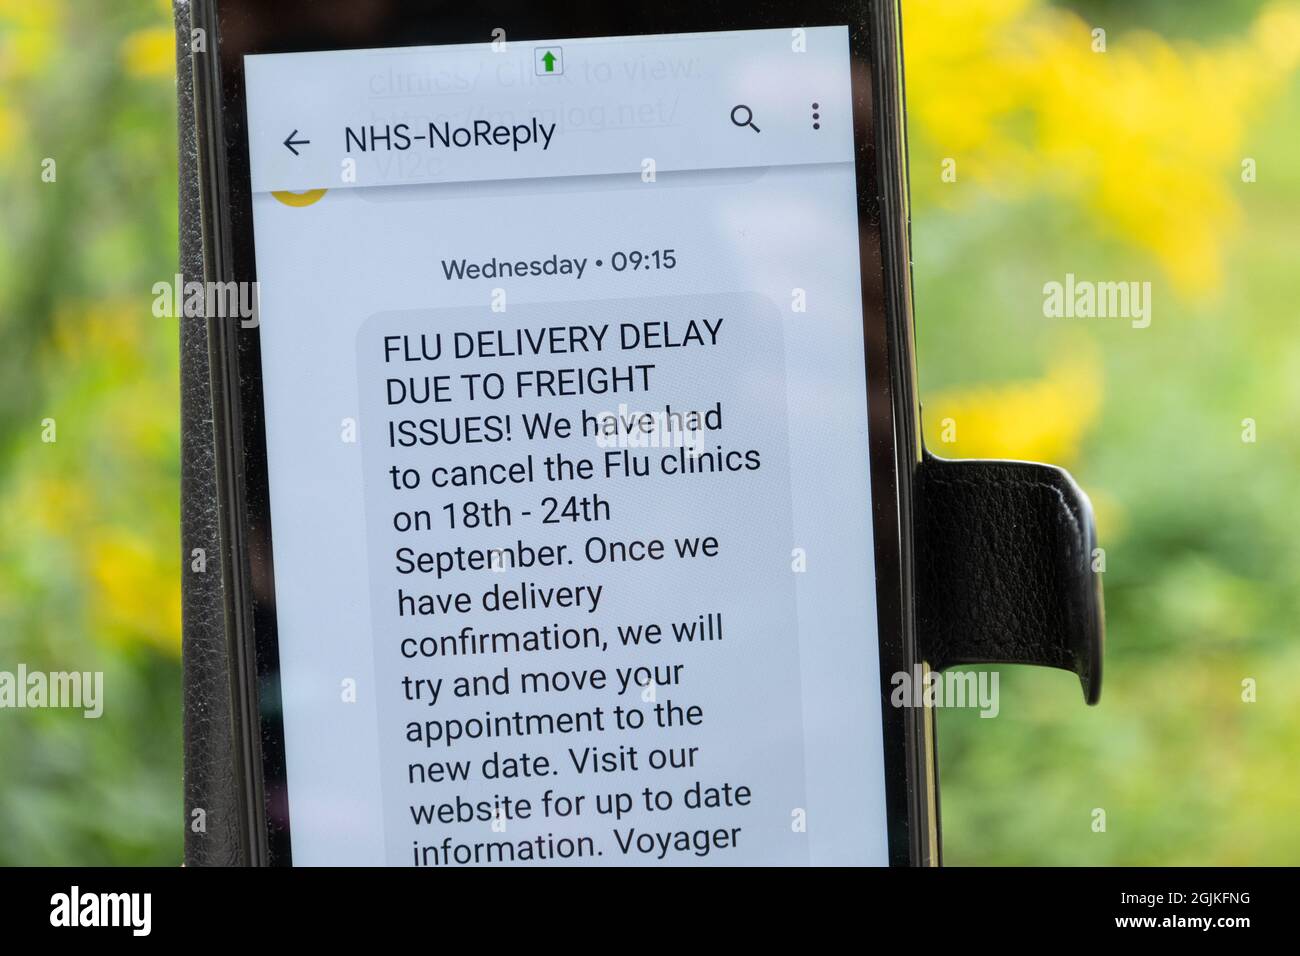 Flu jab clinic cancellation text message on mobile phone, UK, September 2021. Cancelled vaccinations due to freight delivery delays. Stock Photo